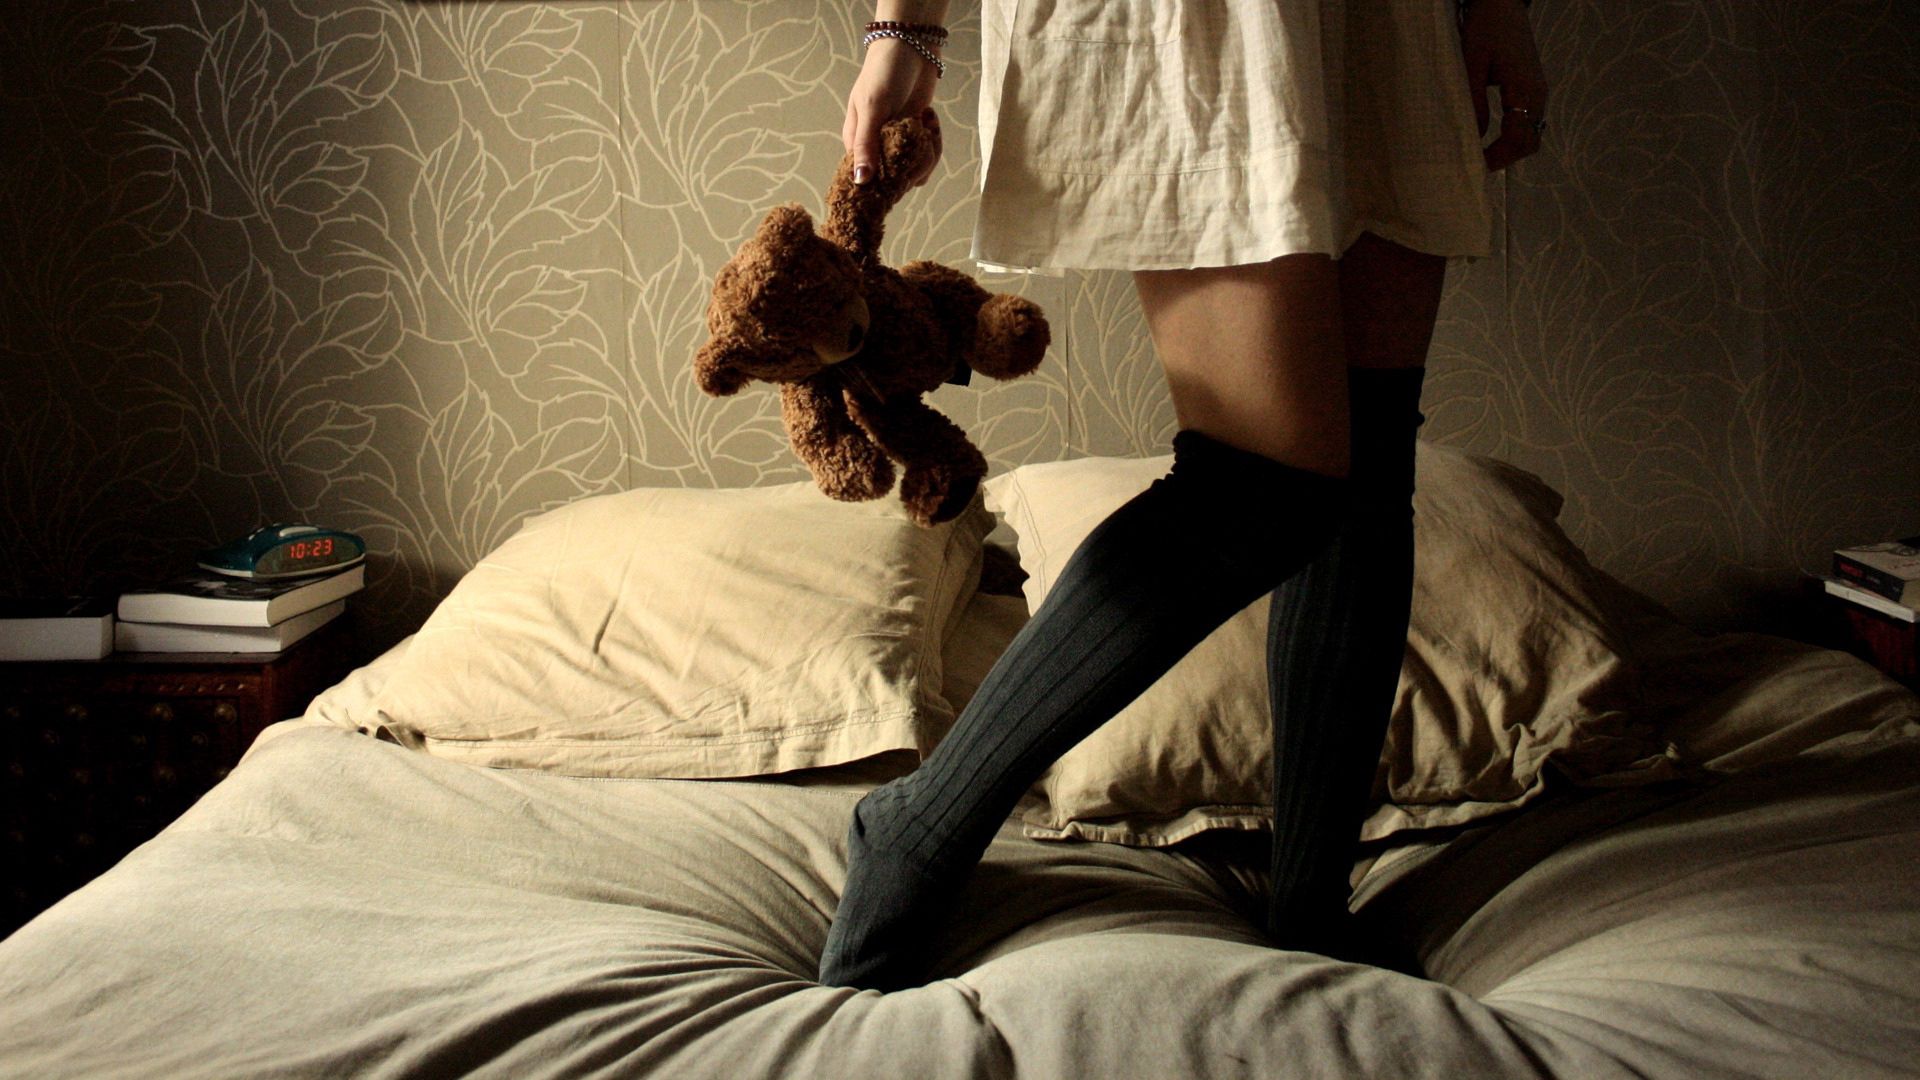 books, miscellanea, miscellaneous, legs, toy, girl, room, bed, cushions, pillows, knee socks